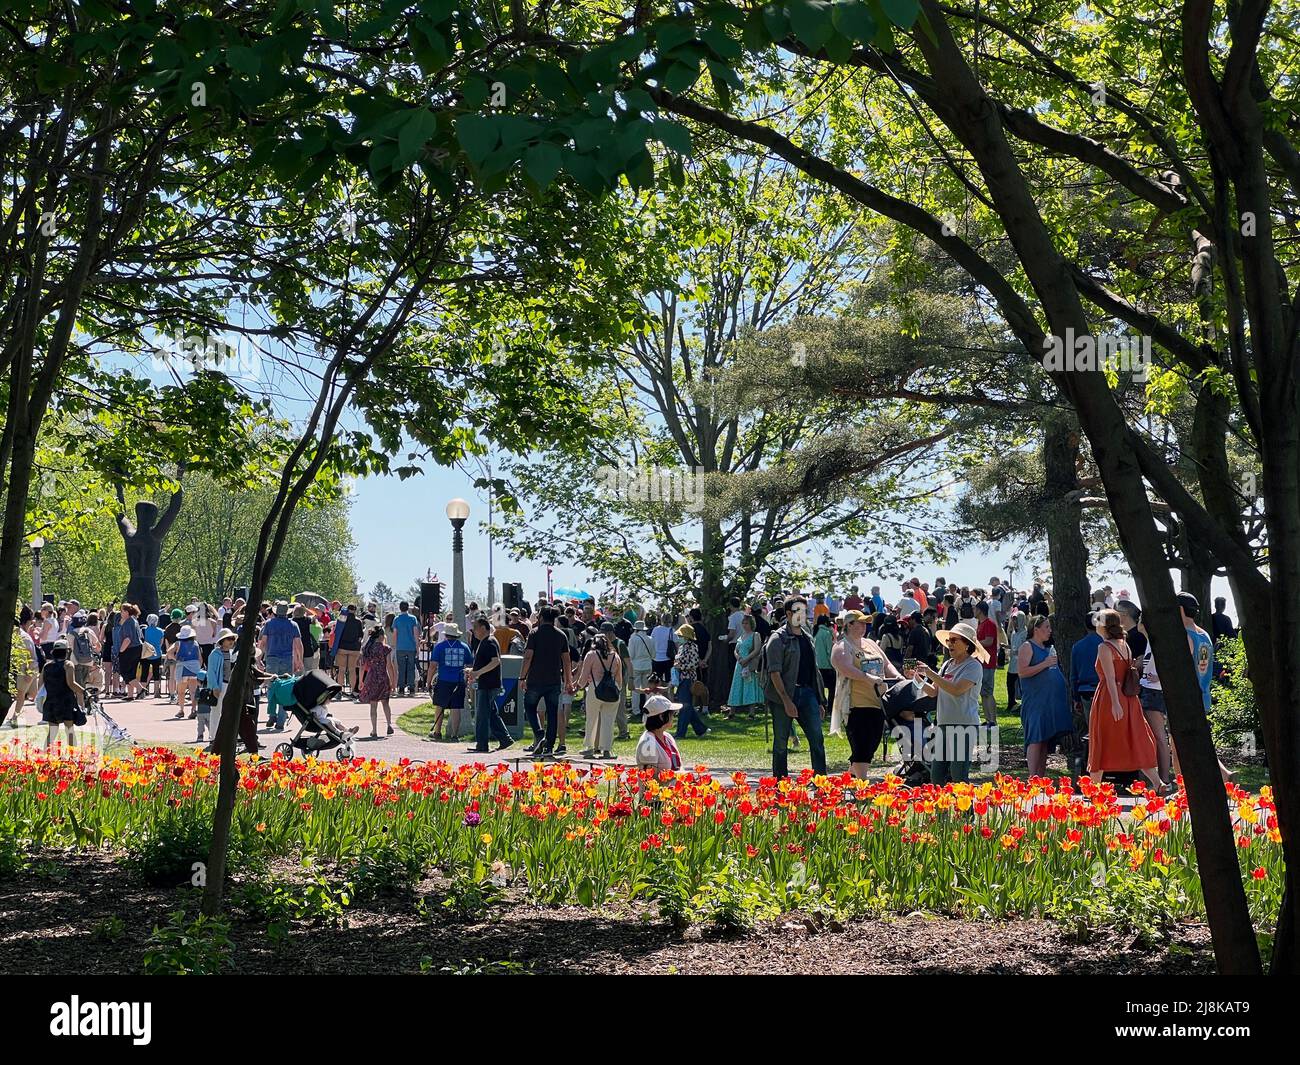 Ottawa, Ontario, Canada - May 14, 2022: Crowds of people enjoy the Ottawa Tulip Festival, an annual event in the nation's capital. Stock Photo